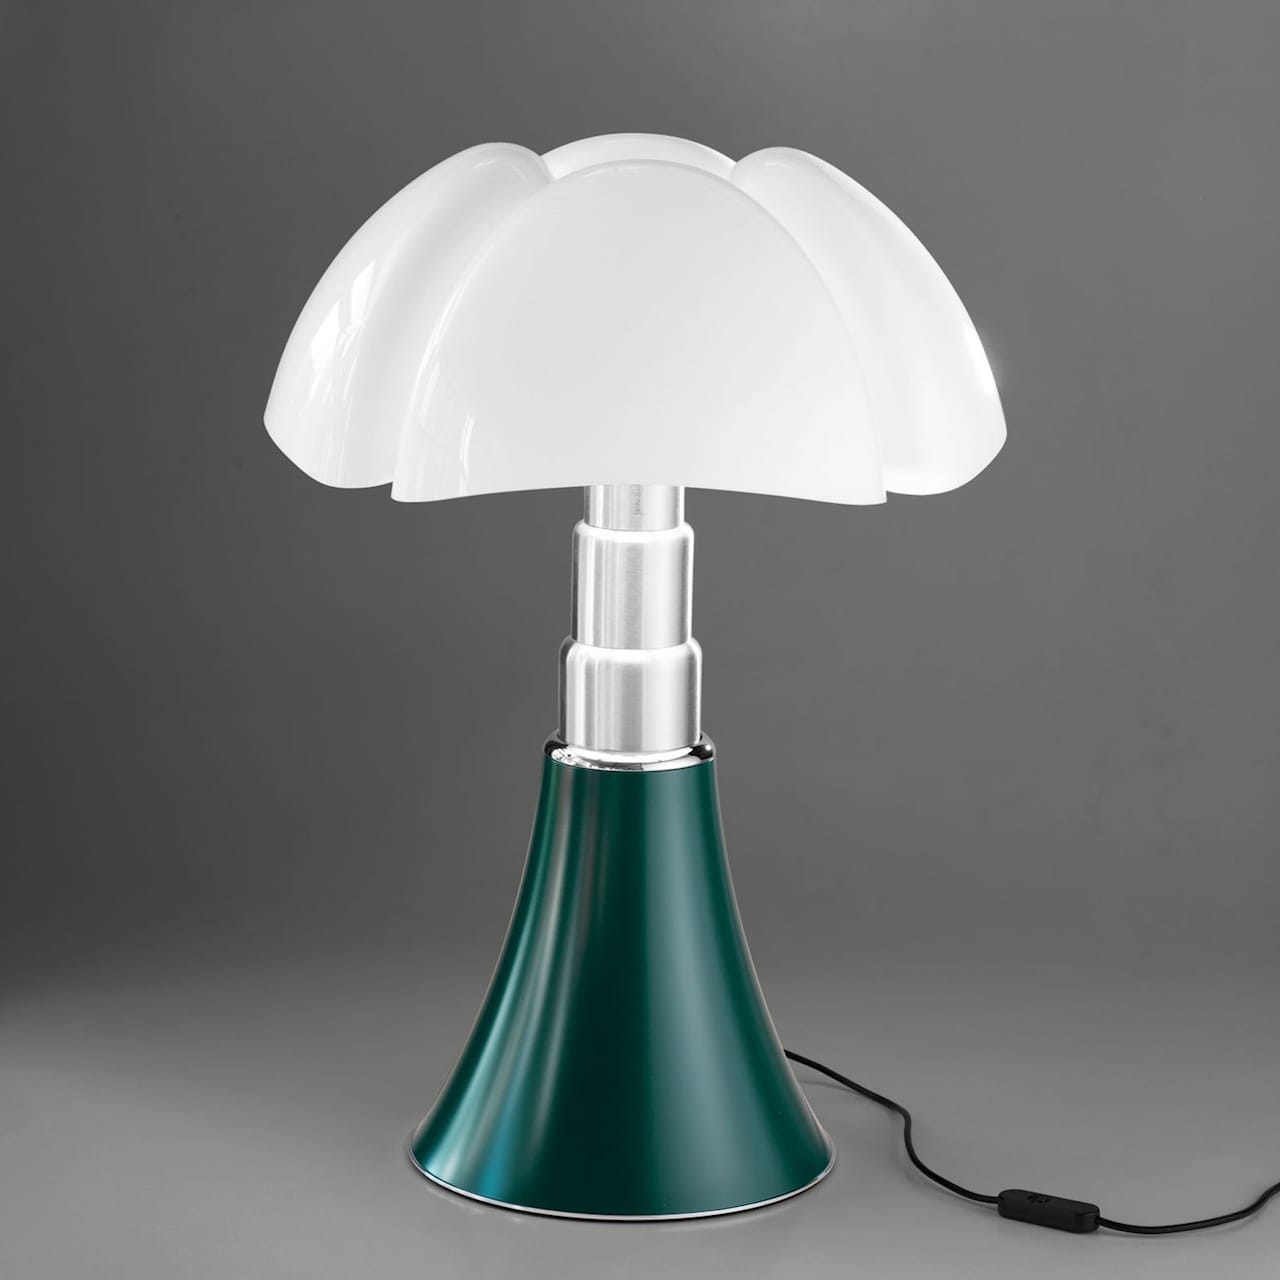 Pipistrello Table Lamp Agave Green - without Dimmer